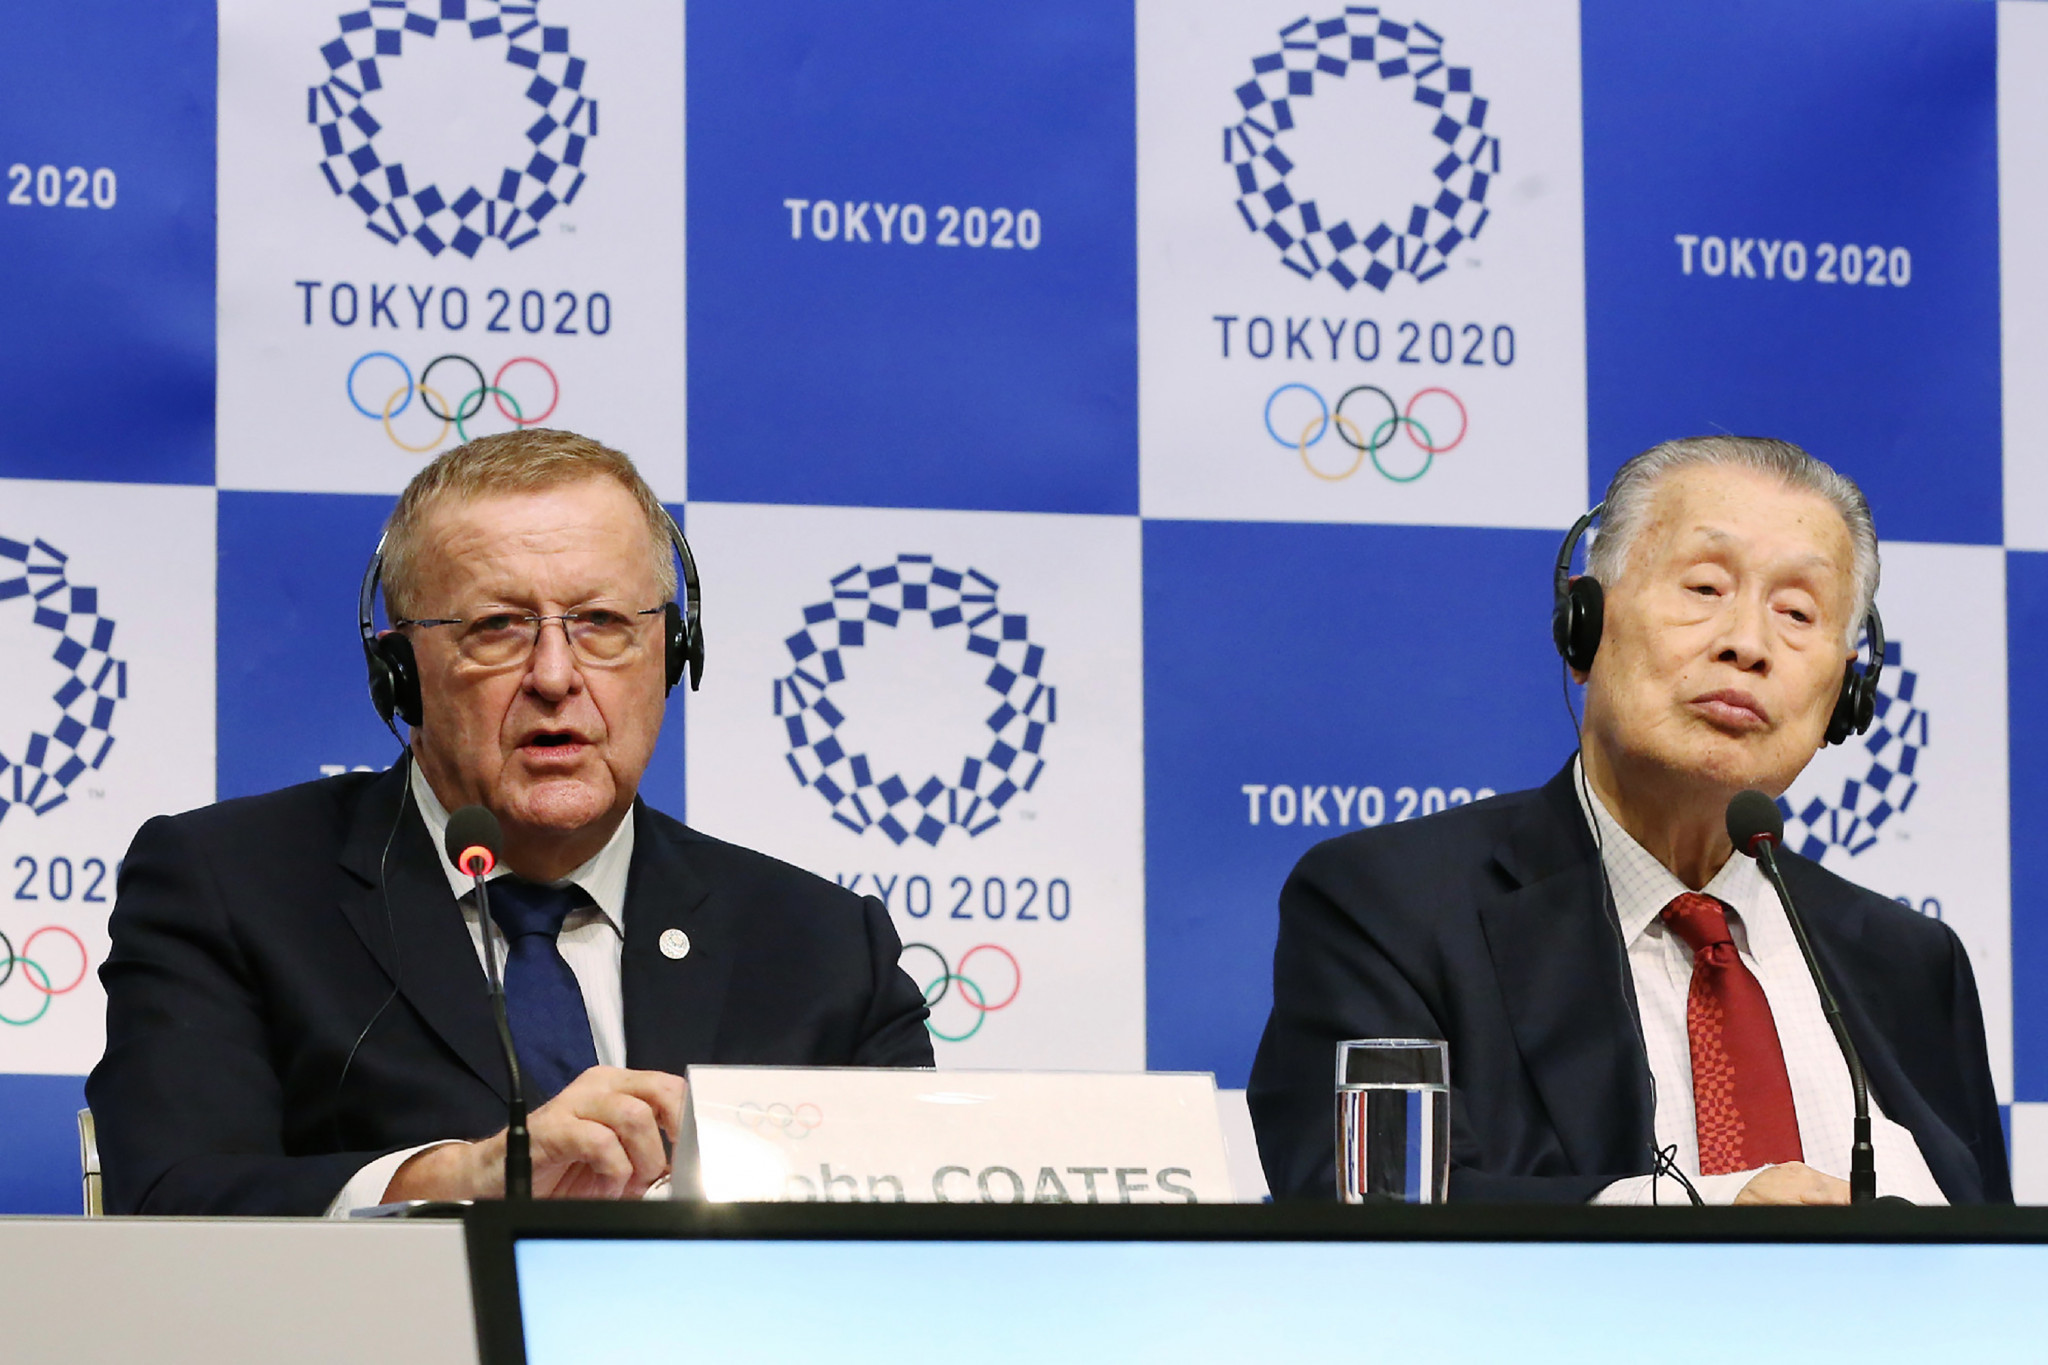 IOC Coordination Commission chair John Coates insisted Tokyo 2020 will not be impacted by the freeze in planning for the boxing event ©Getty Images